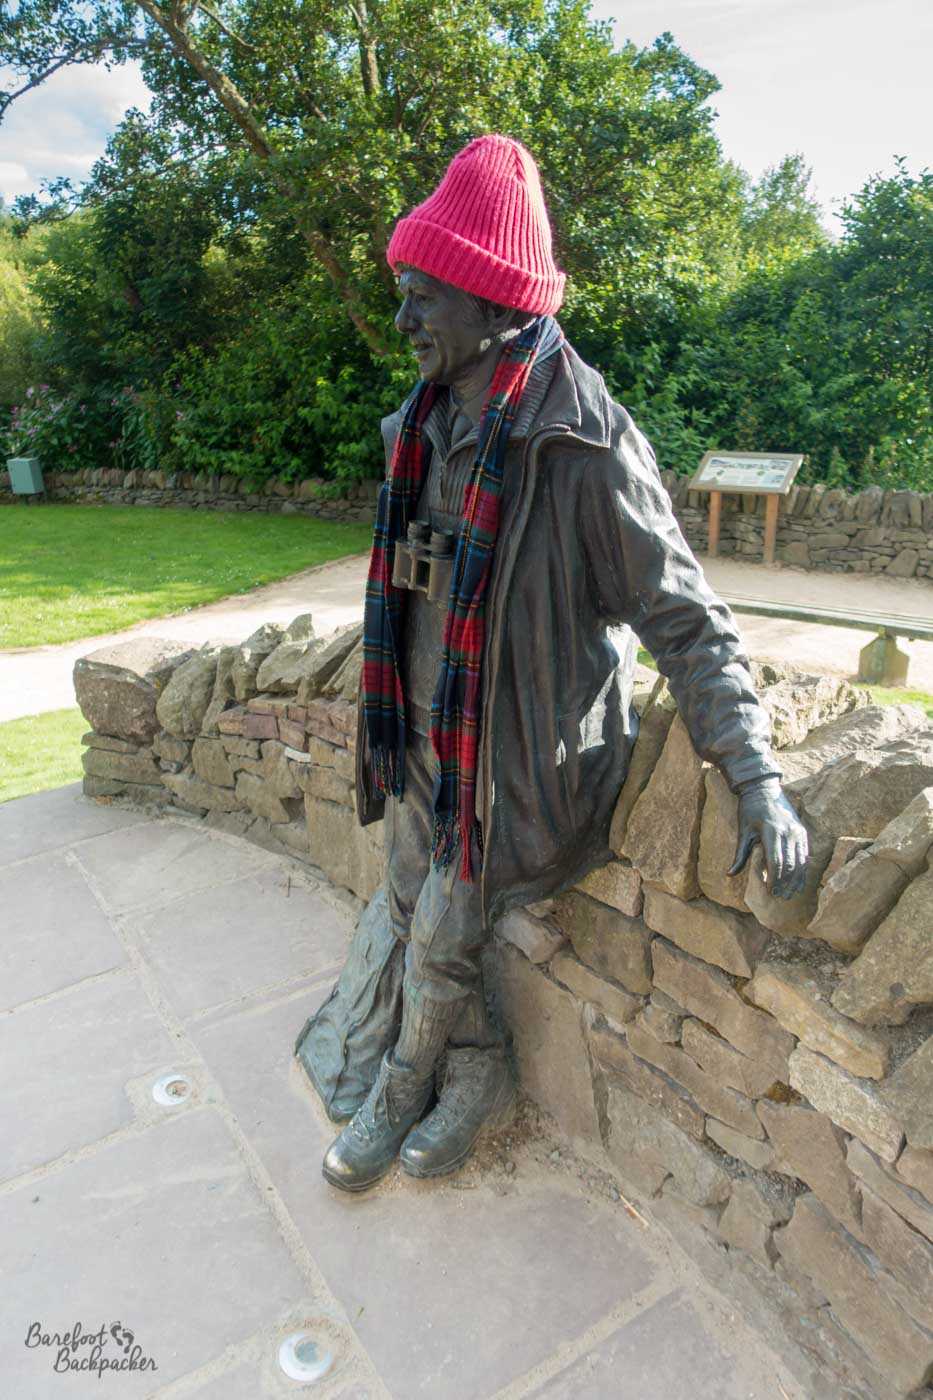 Statue of a man leaning against a wall. He's wearing a jacket, hiking boots, and has binoculars around his neck. At this specific time, he has also been yarn-bombed, and is wearing a knitted hat and a scarf.